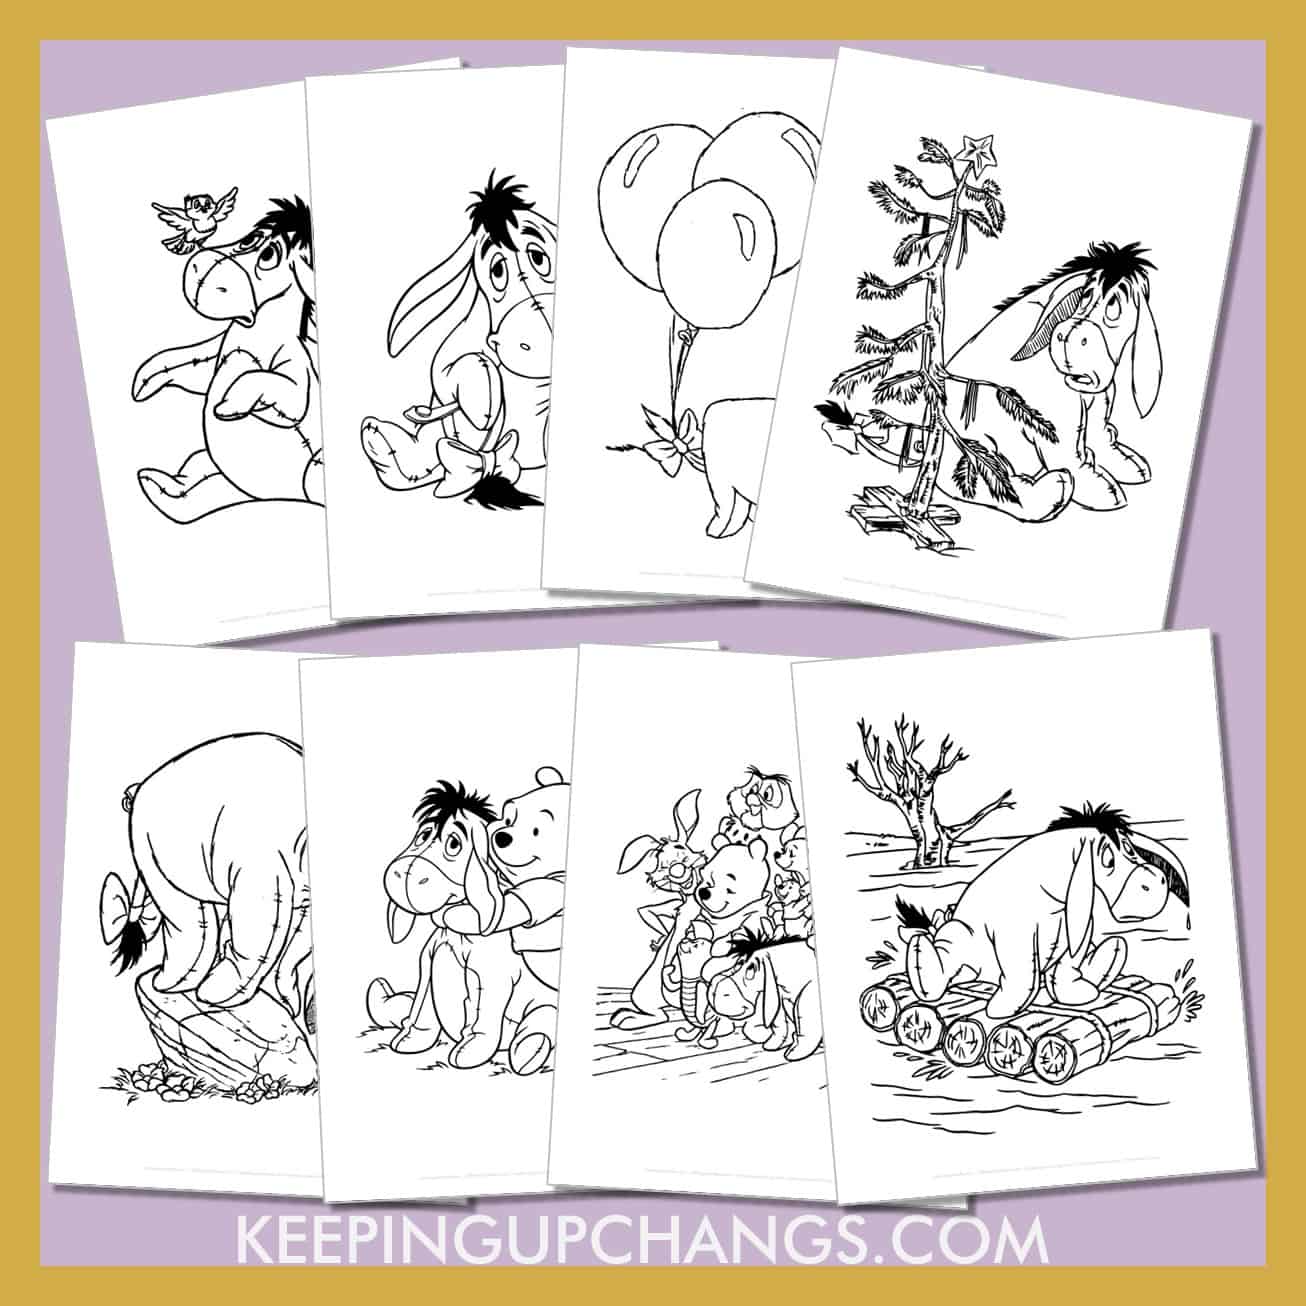 free eeyore pictures to color for toddlers, kids, adults.